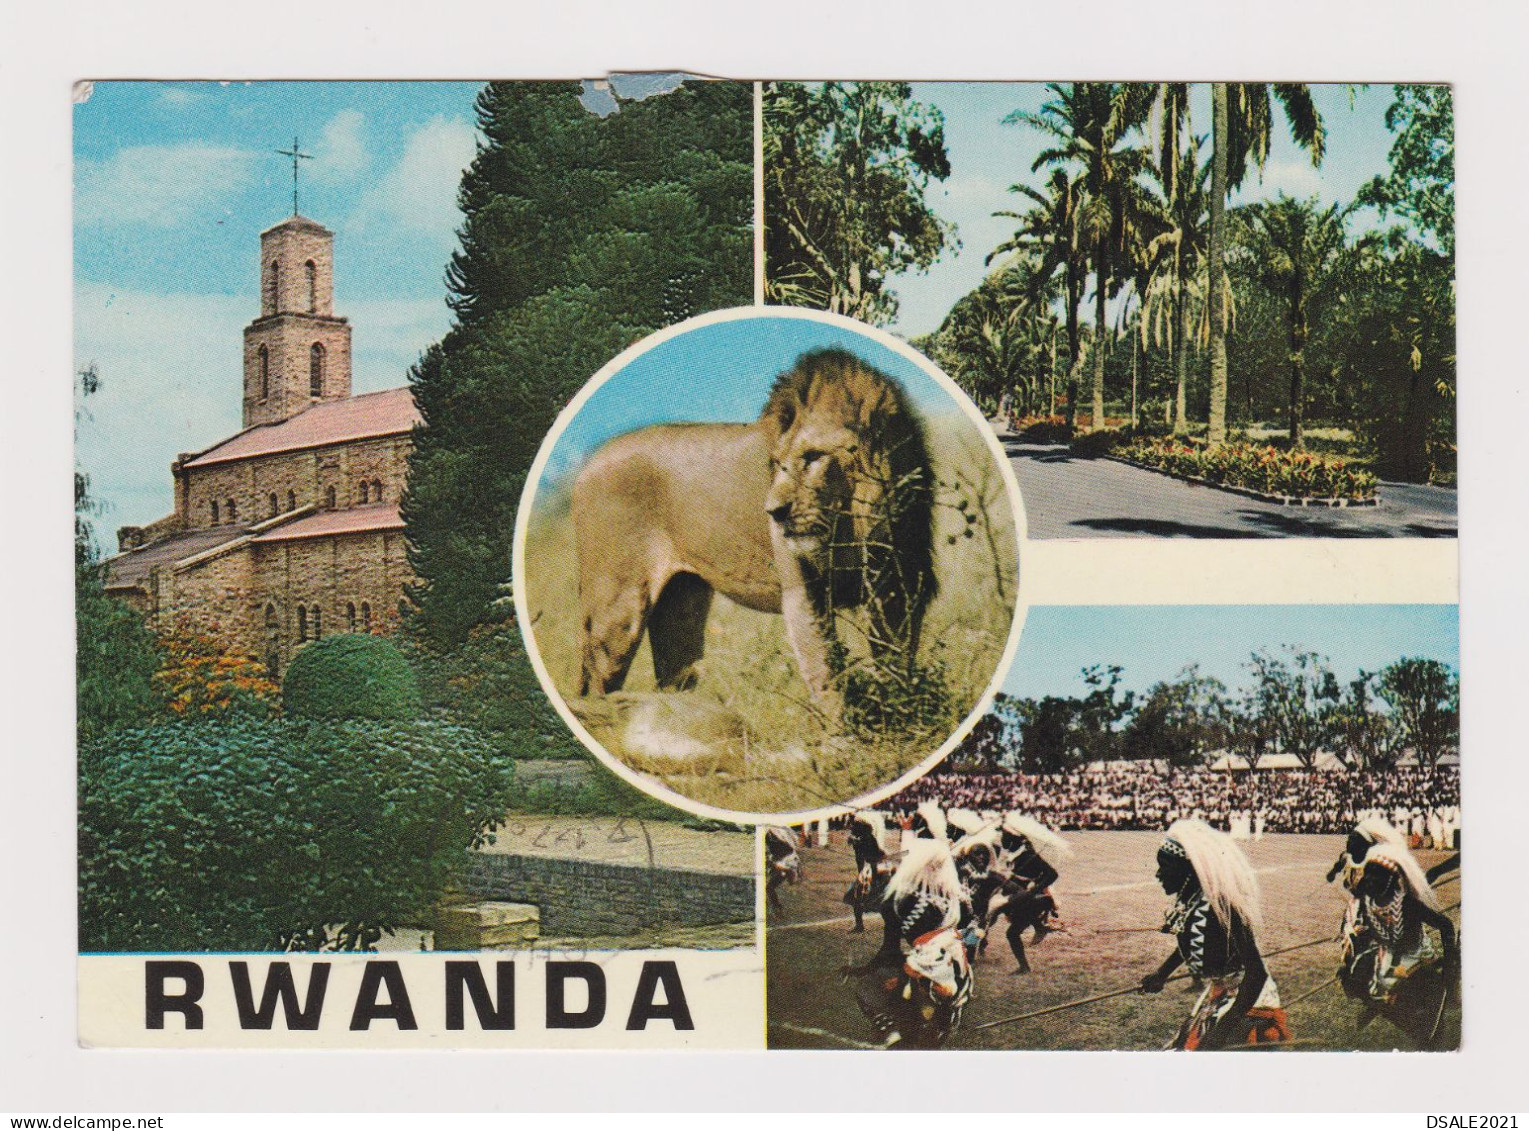 RWANDA Multiple Views Church, Native Dance, Photo Postcard With 18F Topic Stamp 1970s Sent Airmail To Bulgaria (67381) - Covers & Documents